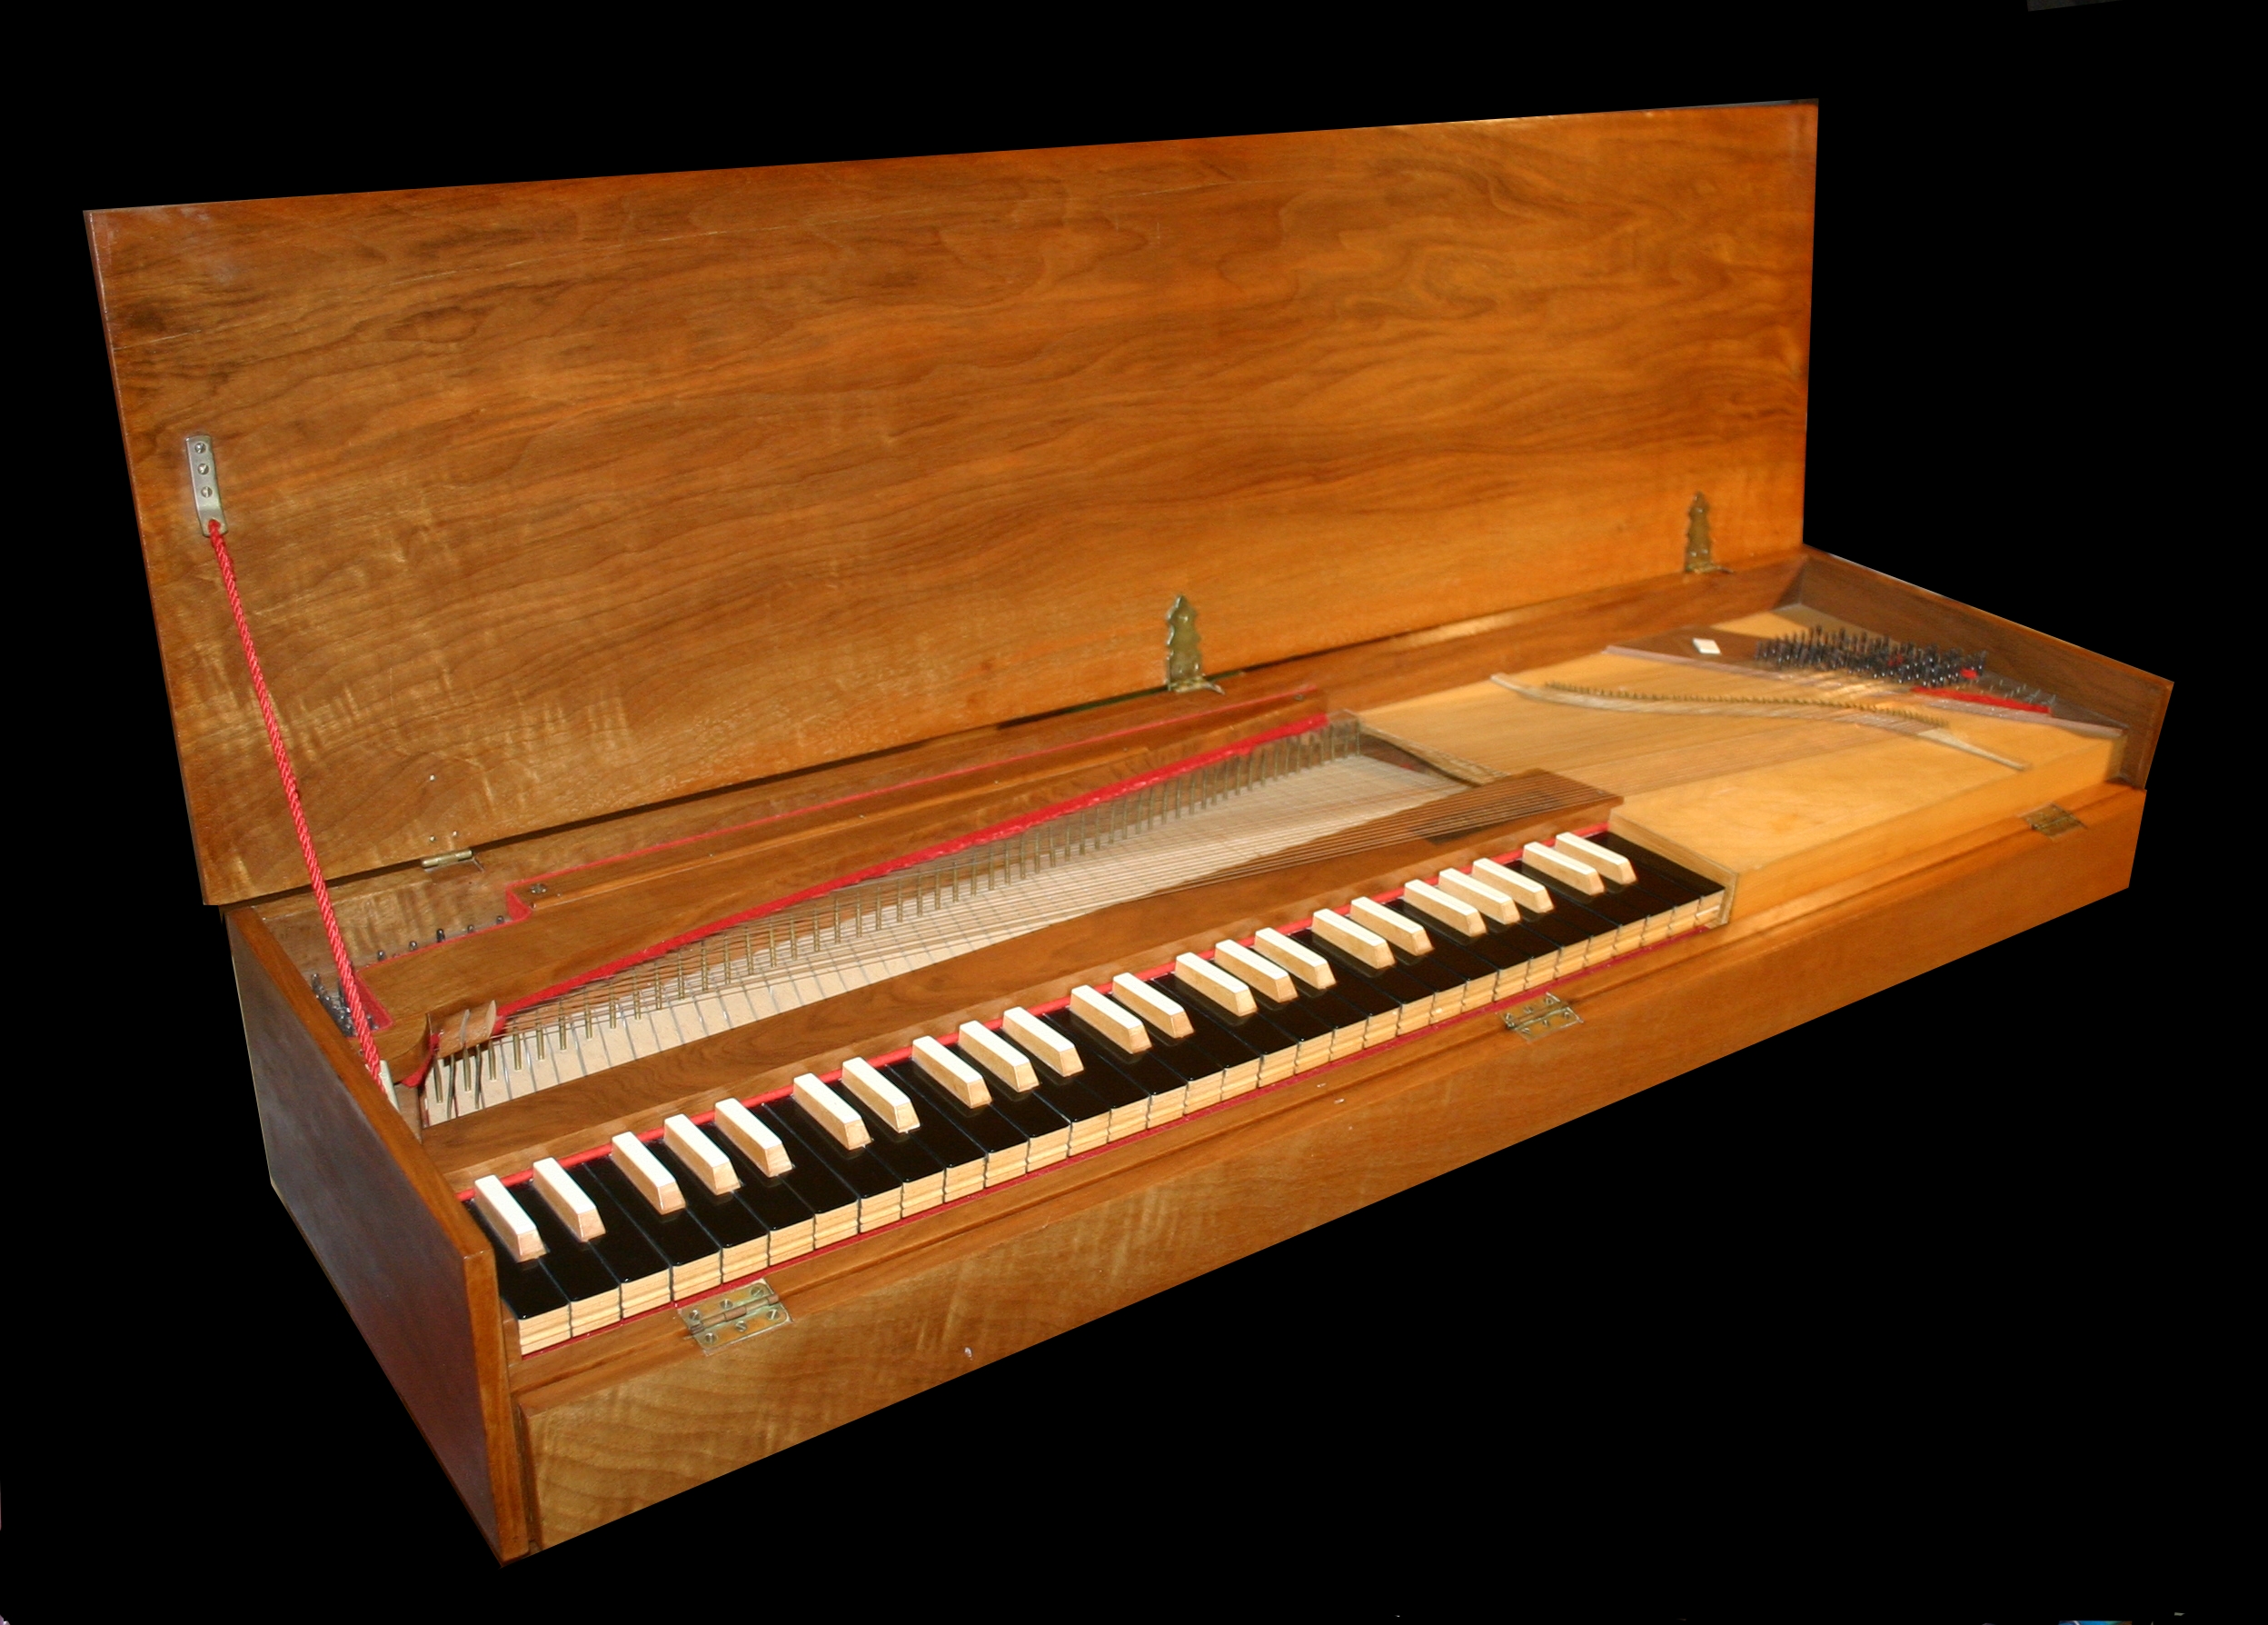 Baltimorerecorders Org Information About The Clavichord